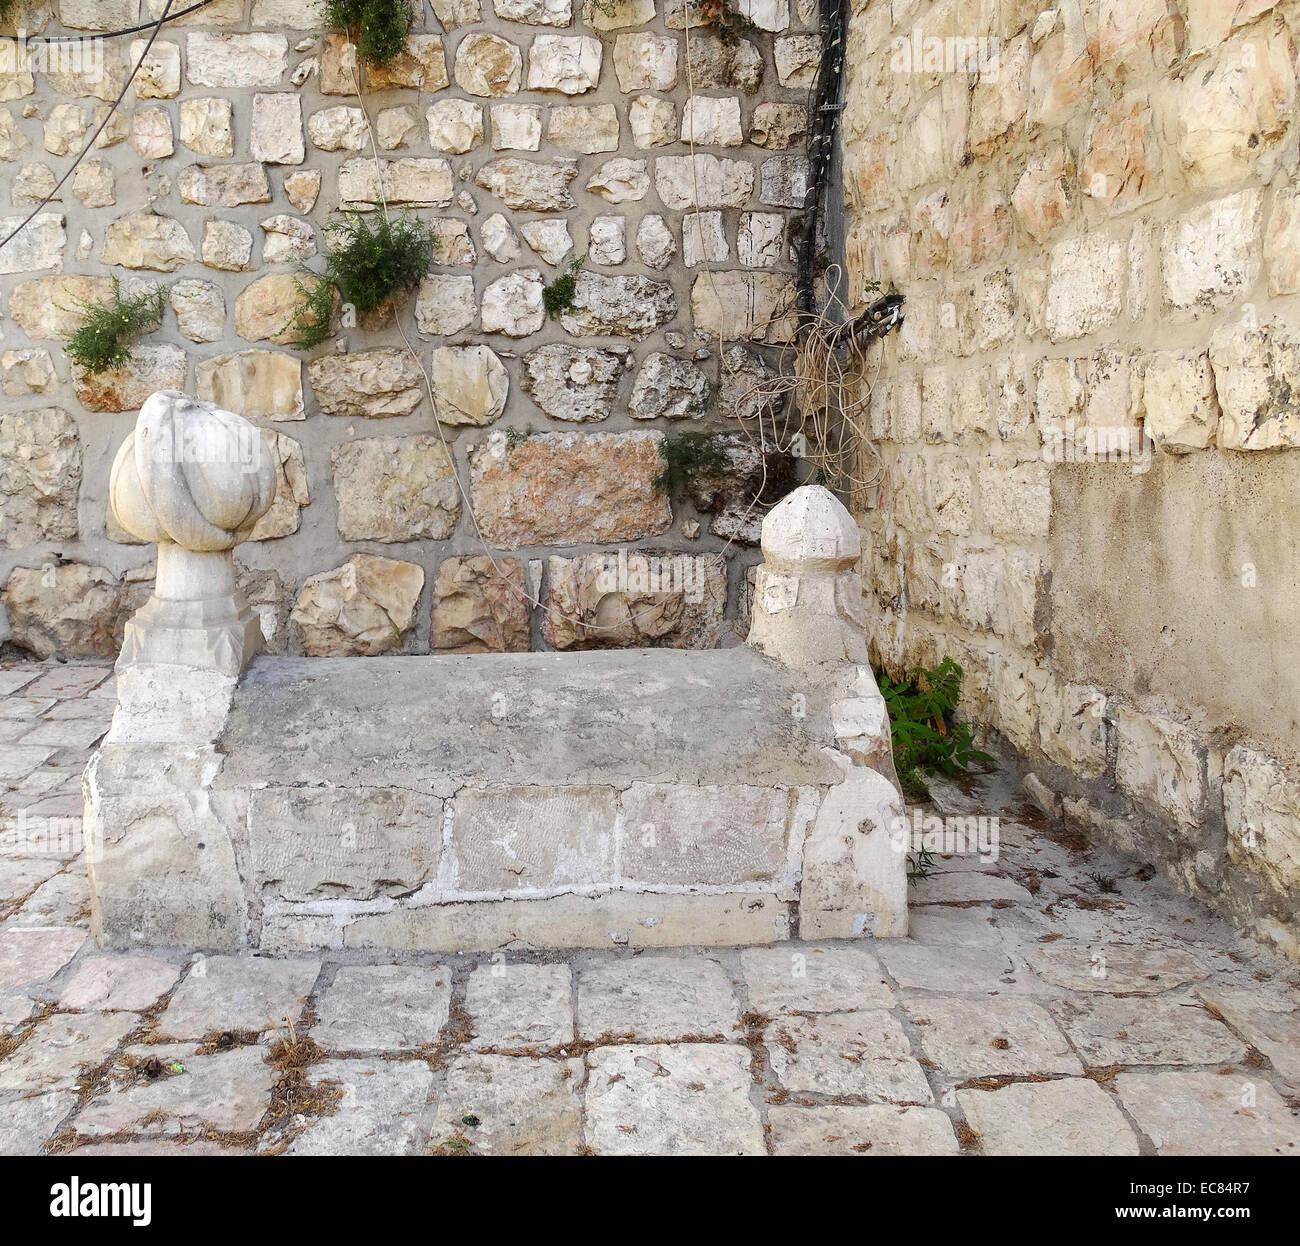 Arab grave stone and tomb at the Jaffa Gate; a stone portal in the historic walls of the old City of Jerusalem. It is one of eight gates in Jerusalem's Old City Walls. Stock Photo